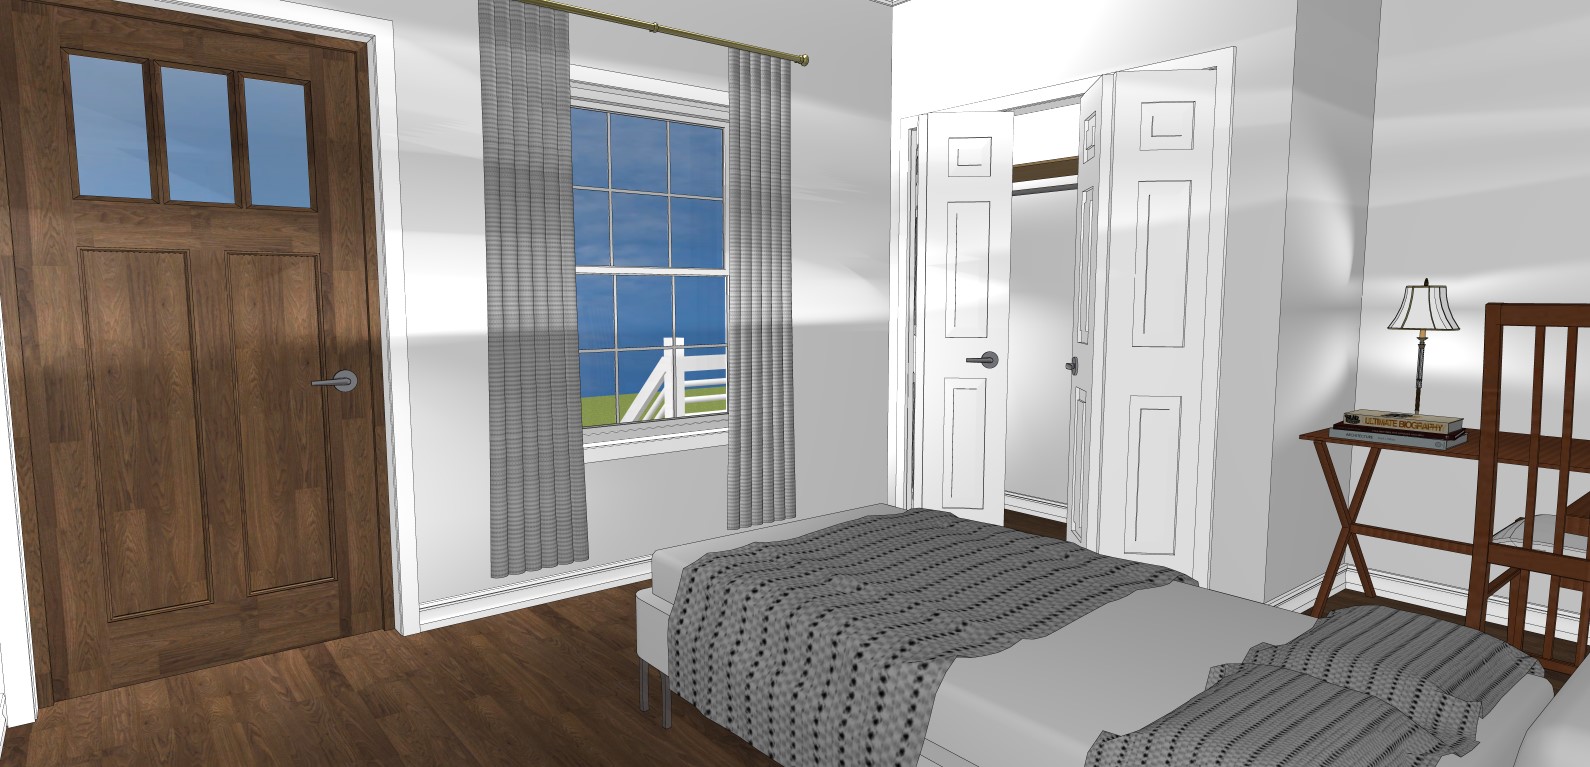 A rendering of a bedroom at Evergreen Twin Cottages. Photo via Heritage Homes & Land Acquisitions